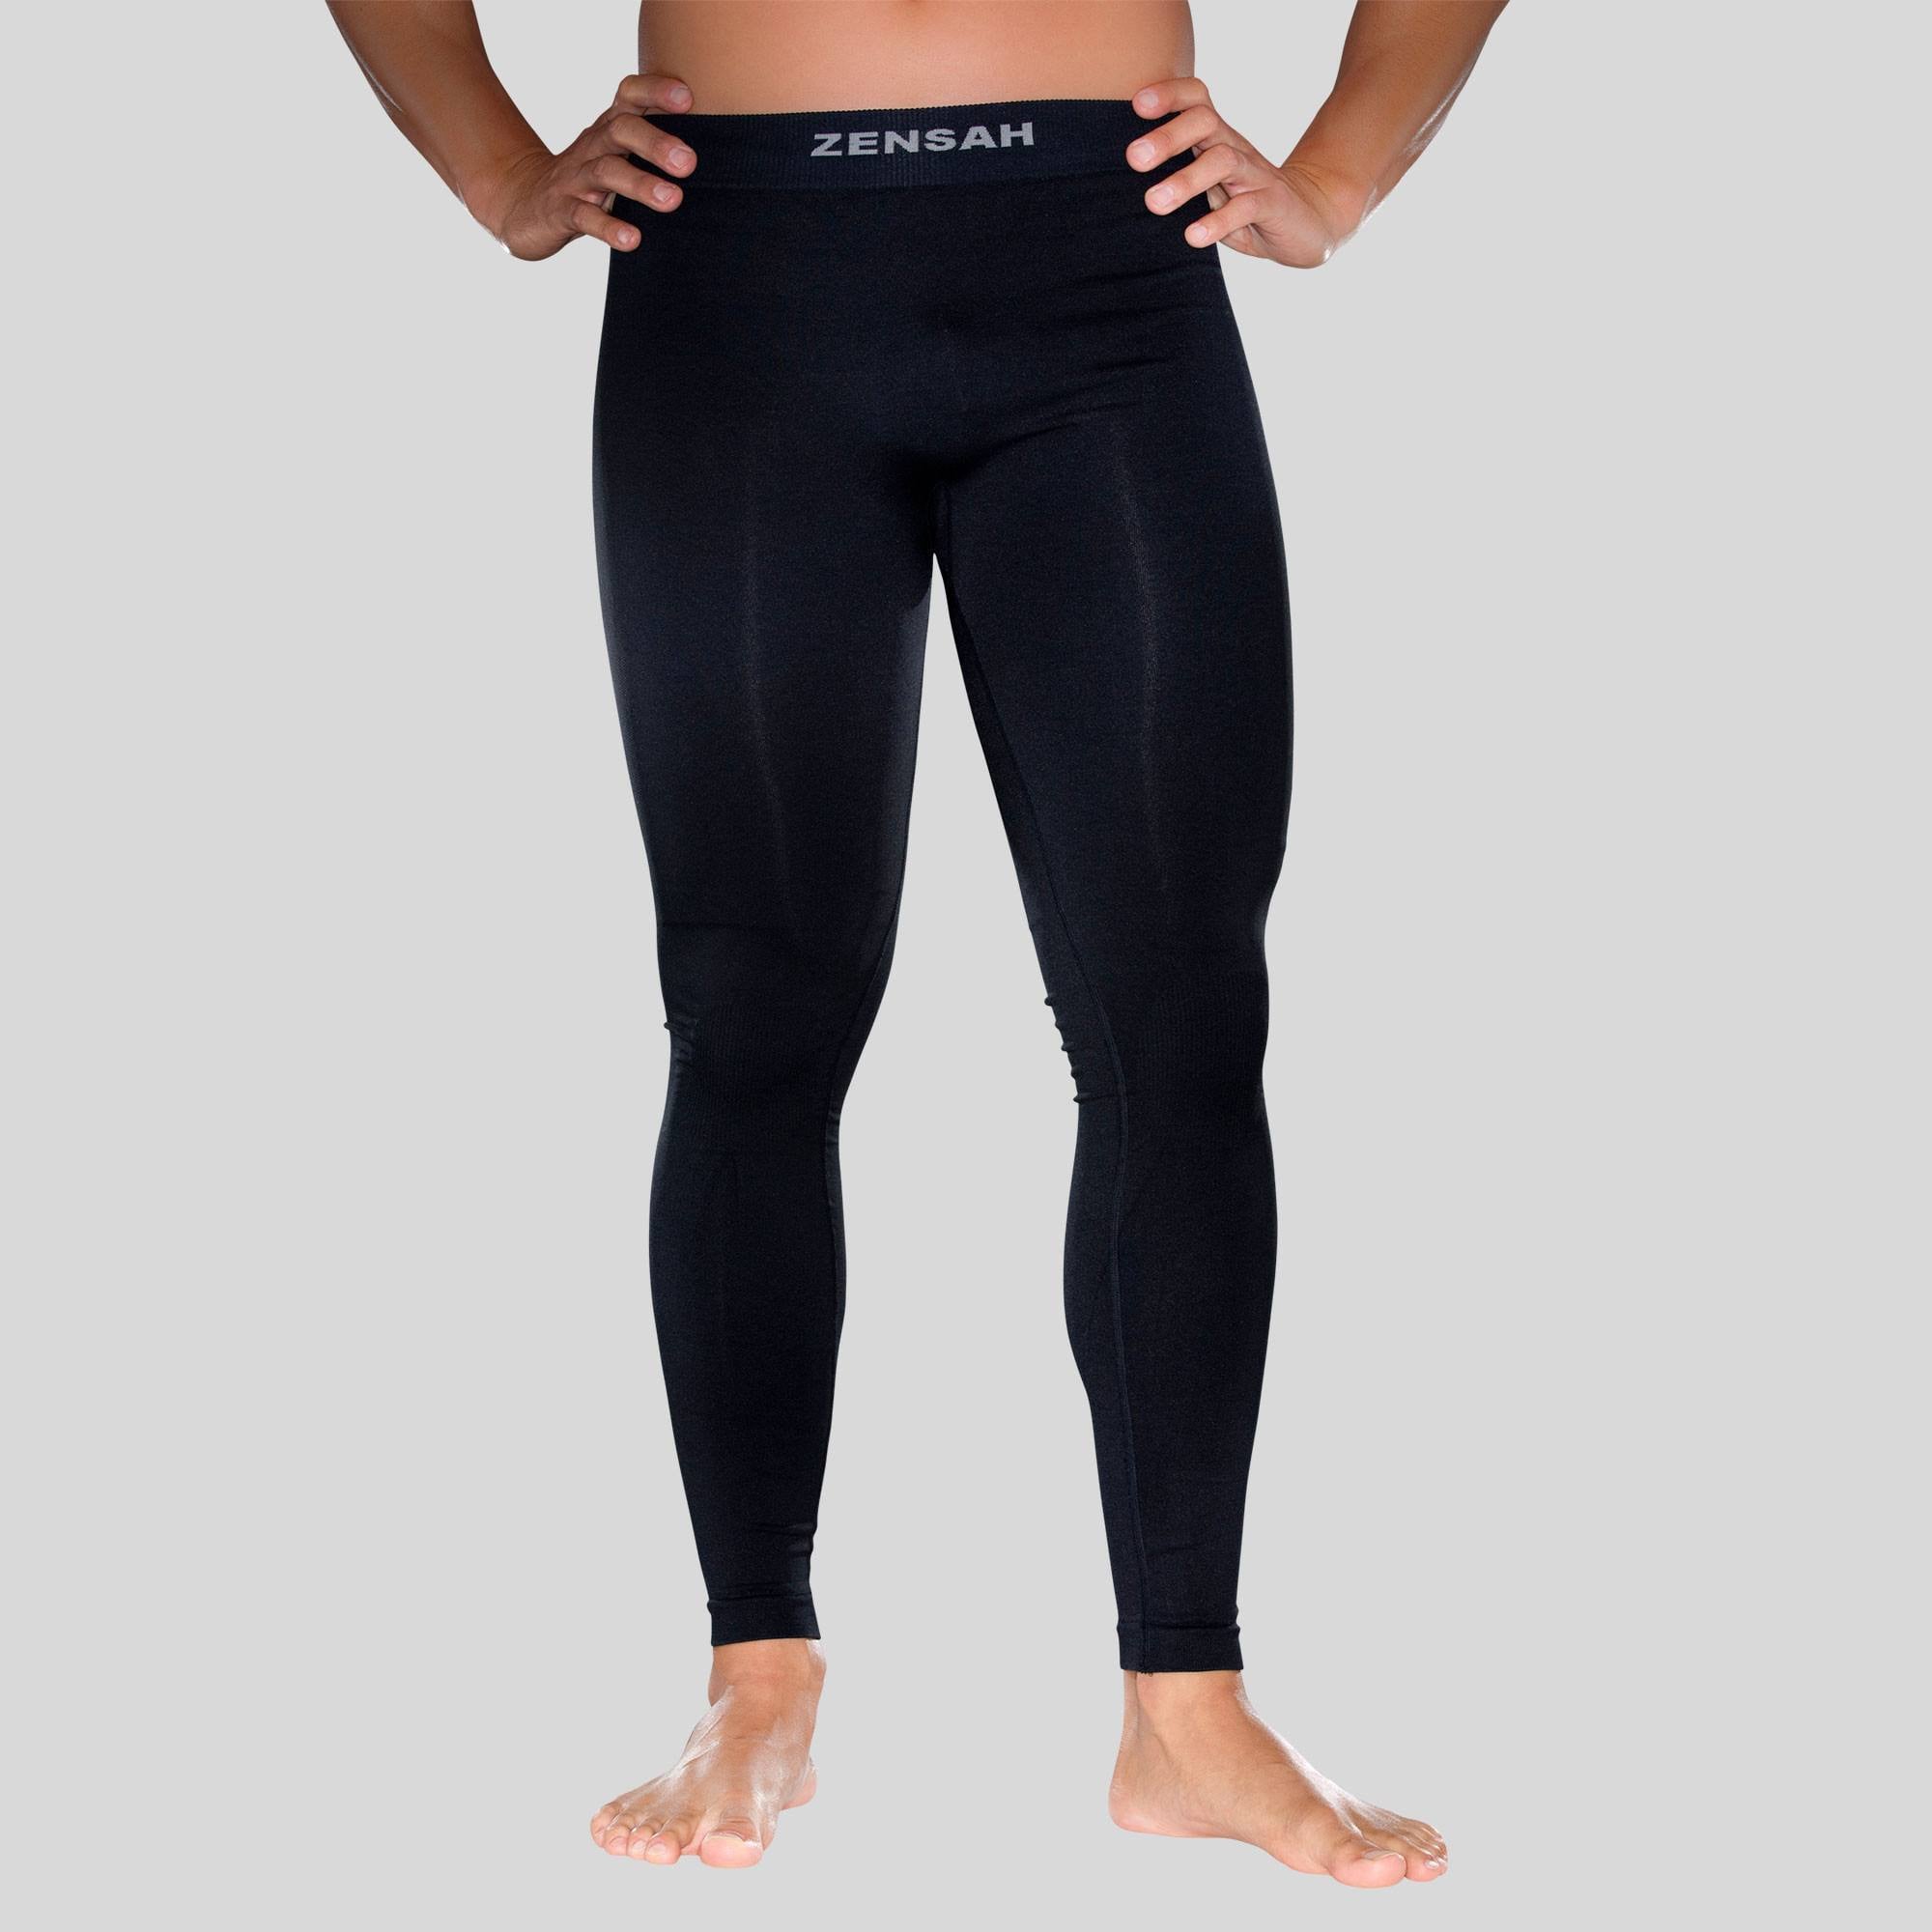 Women's Leggings and bottom base layers - Canada